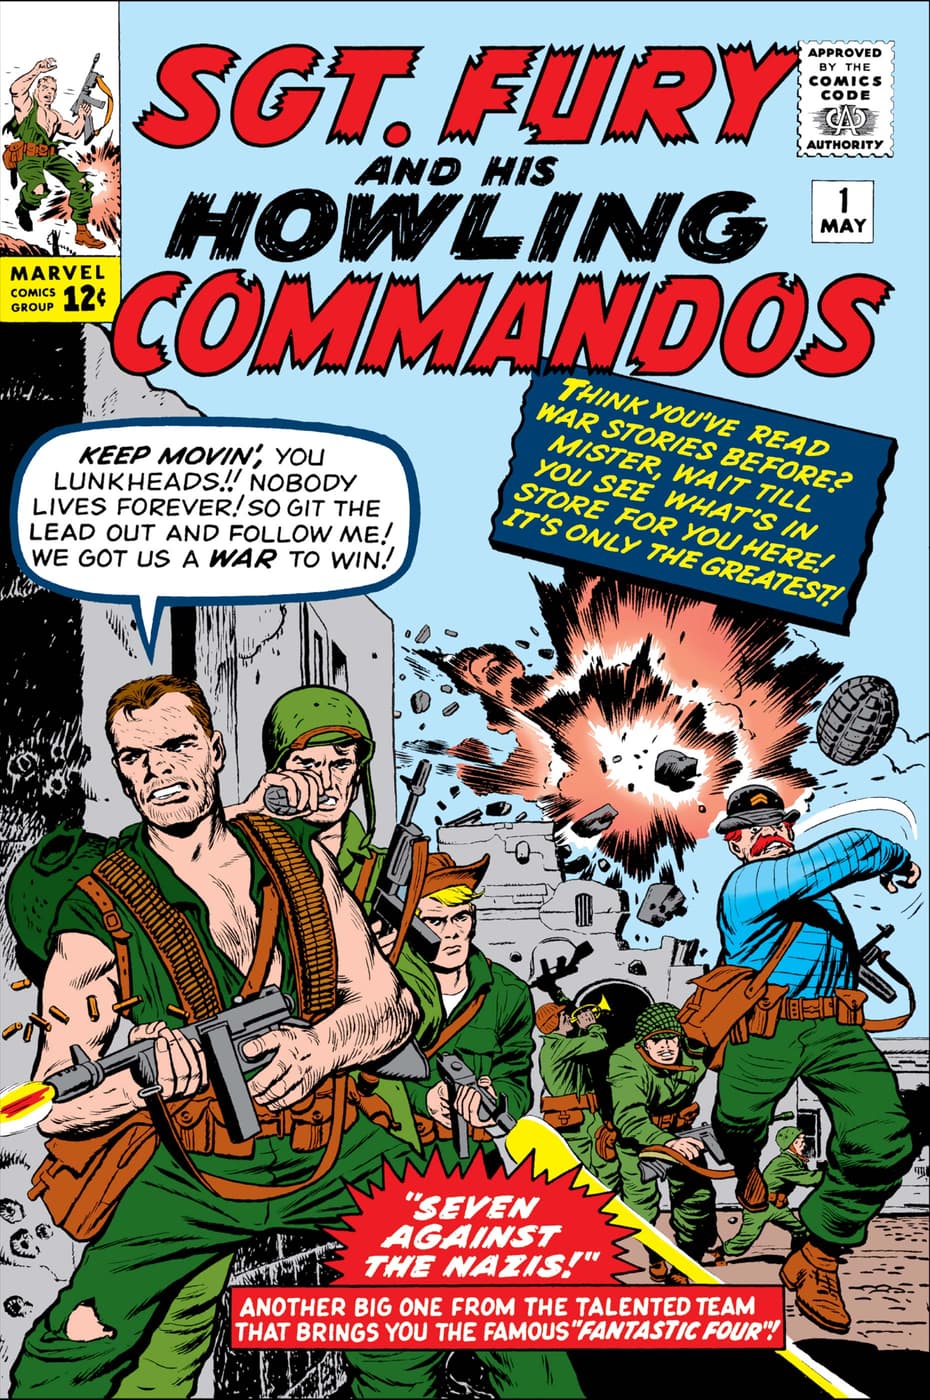 Sgt. Fury and His Howling Commandos (1963) #1